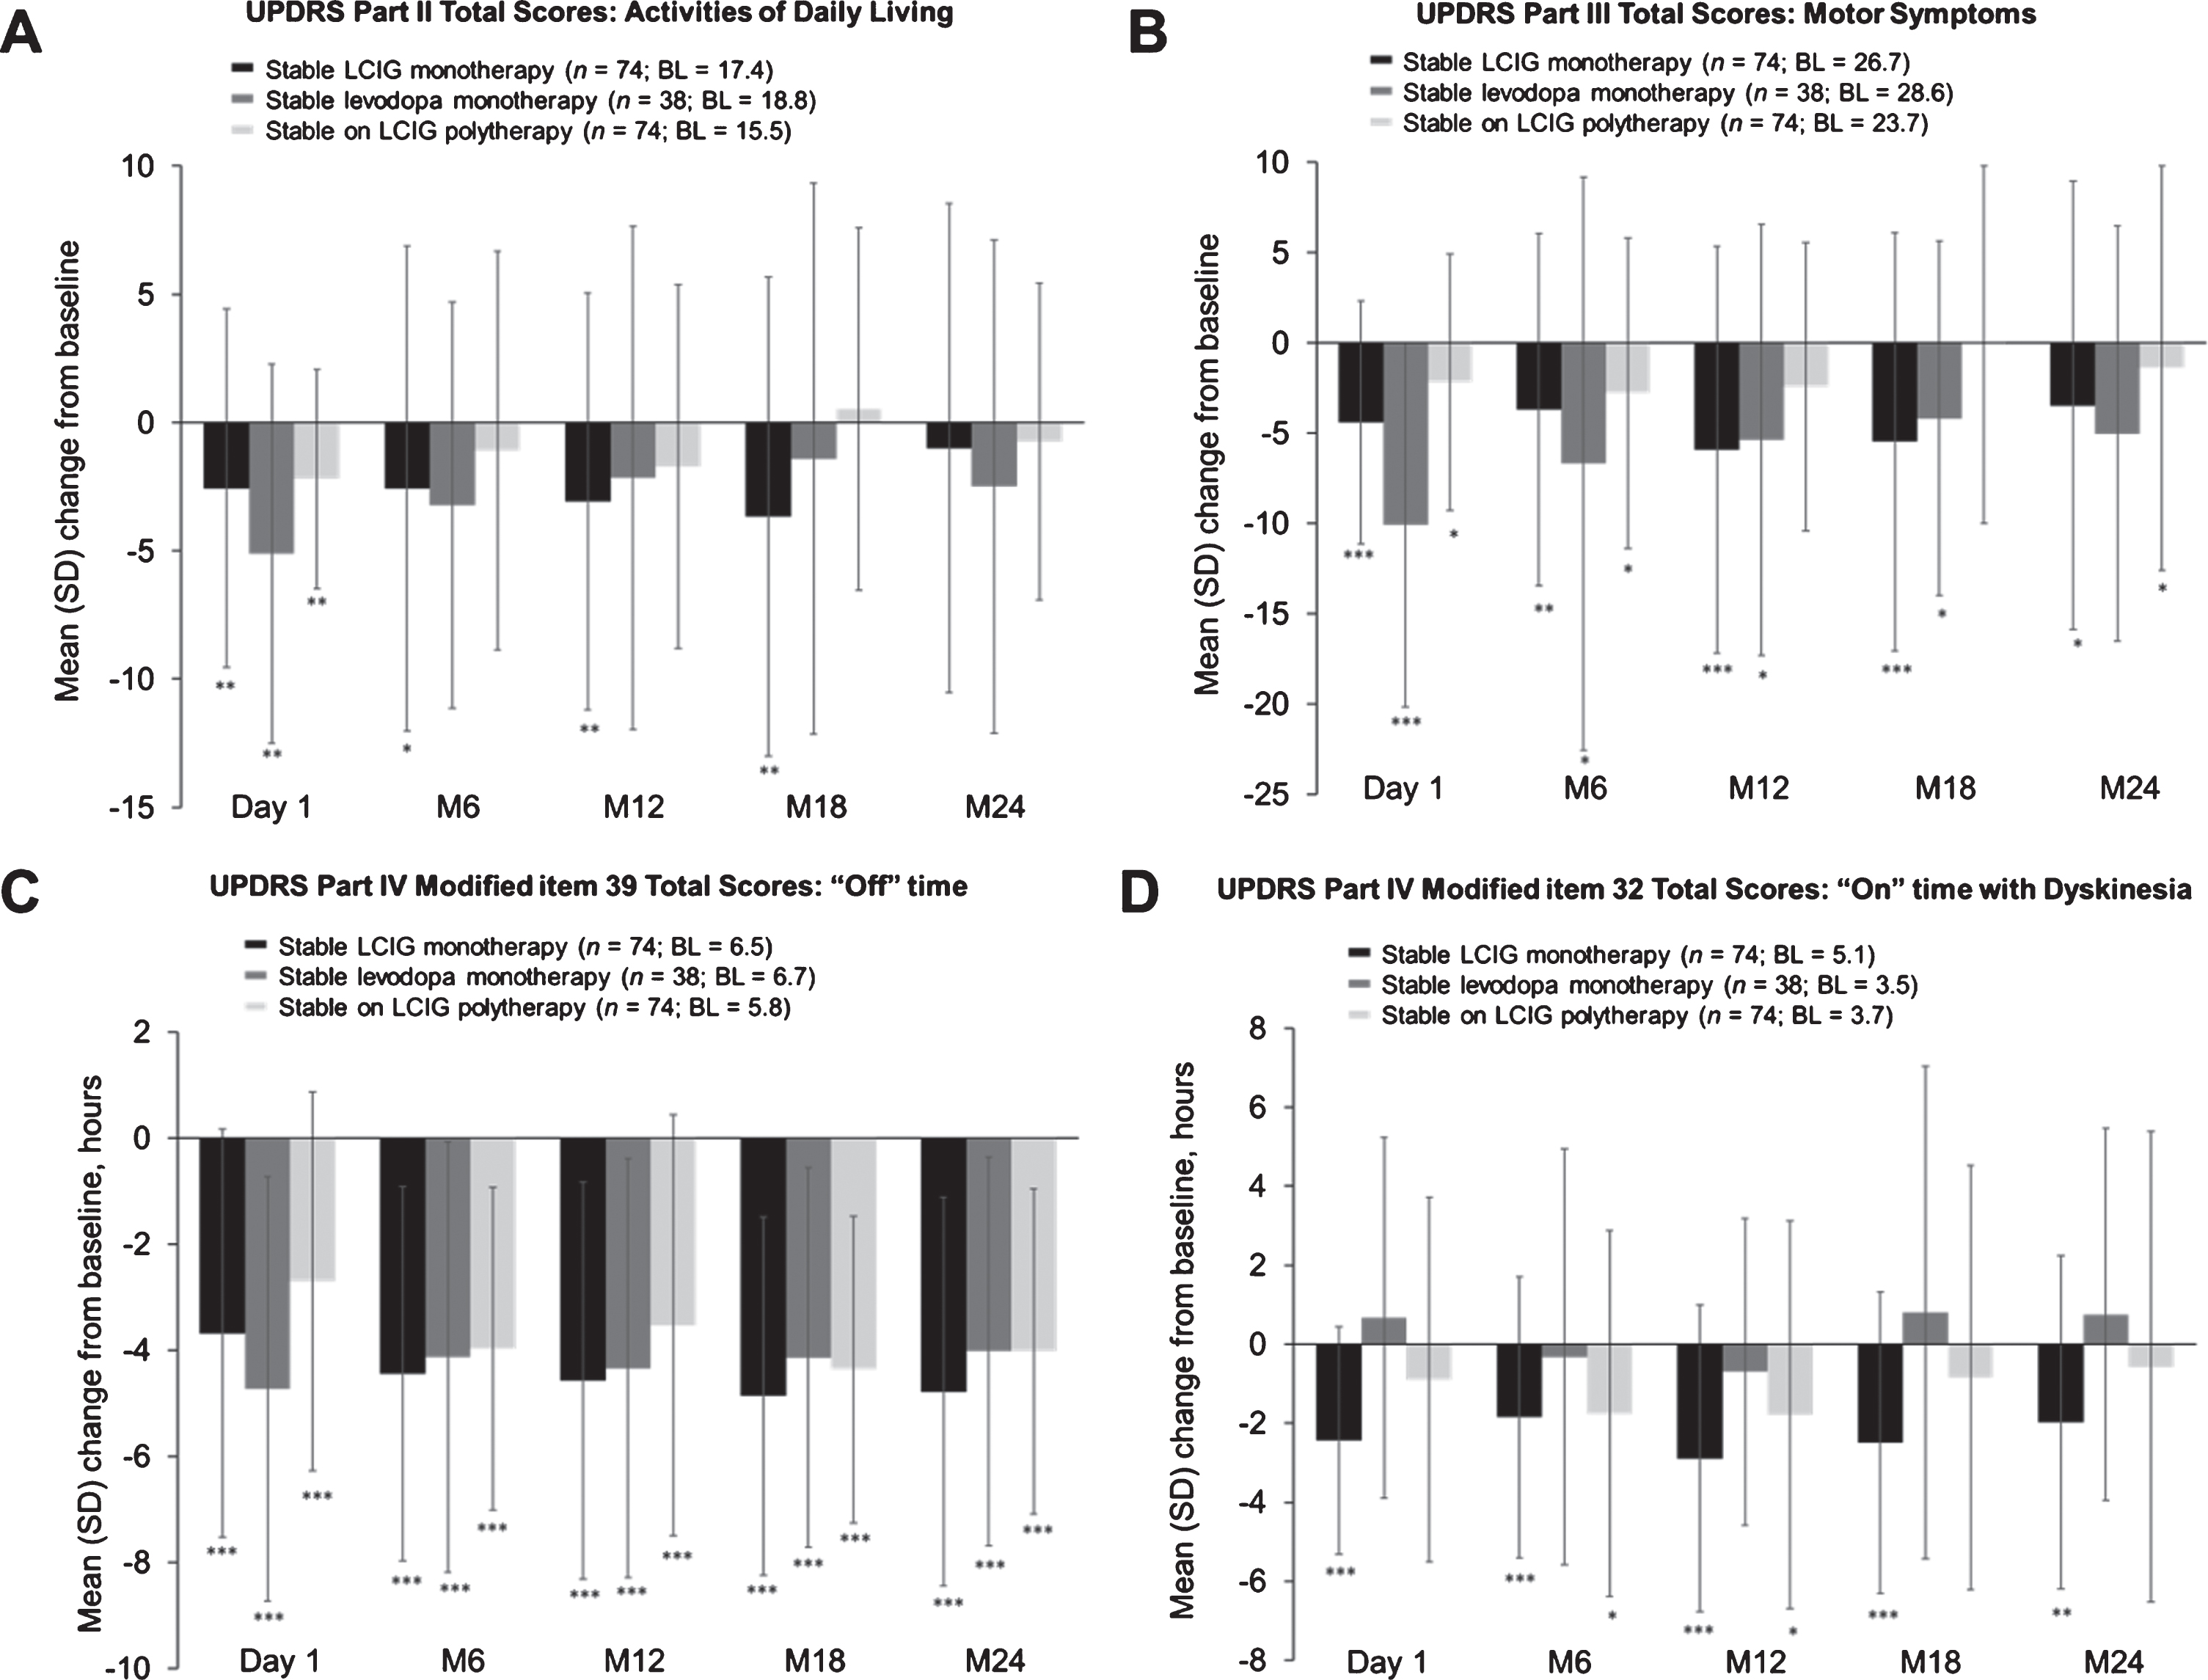 Mean (SD) change from baseline in scores for activities of daily living (A); motor symptoms (B); “Off” time (C); “On” time with dyskinesia at regularly scheduled visits (D). “Baseline” refers to the assessment at the start of LCIG therapy. Error bars indicate standard deviation. *** p≤0.001; **p≤0.01; *p≤0.05. BL, baseline; LCIG, levodopa-carbidopa intestinal gel; M, month; SD, standard deviation; UPDRS, Unified Parkinson’s Disease Rating Scale.